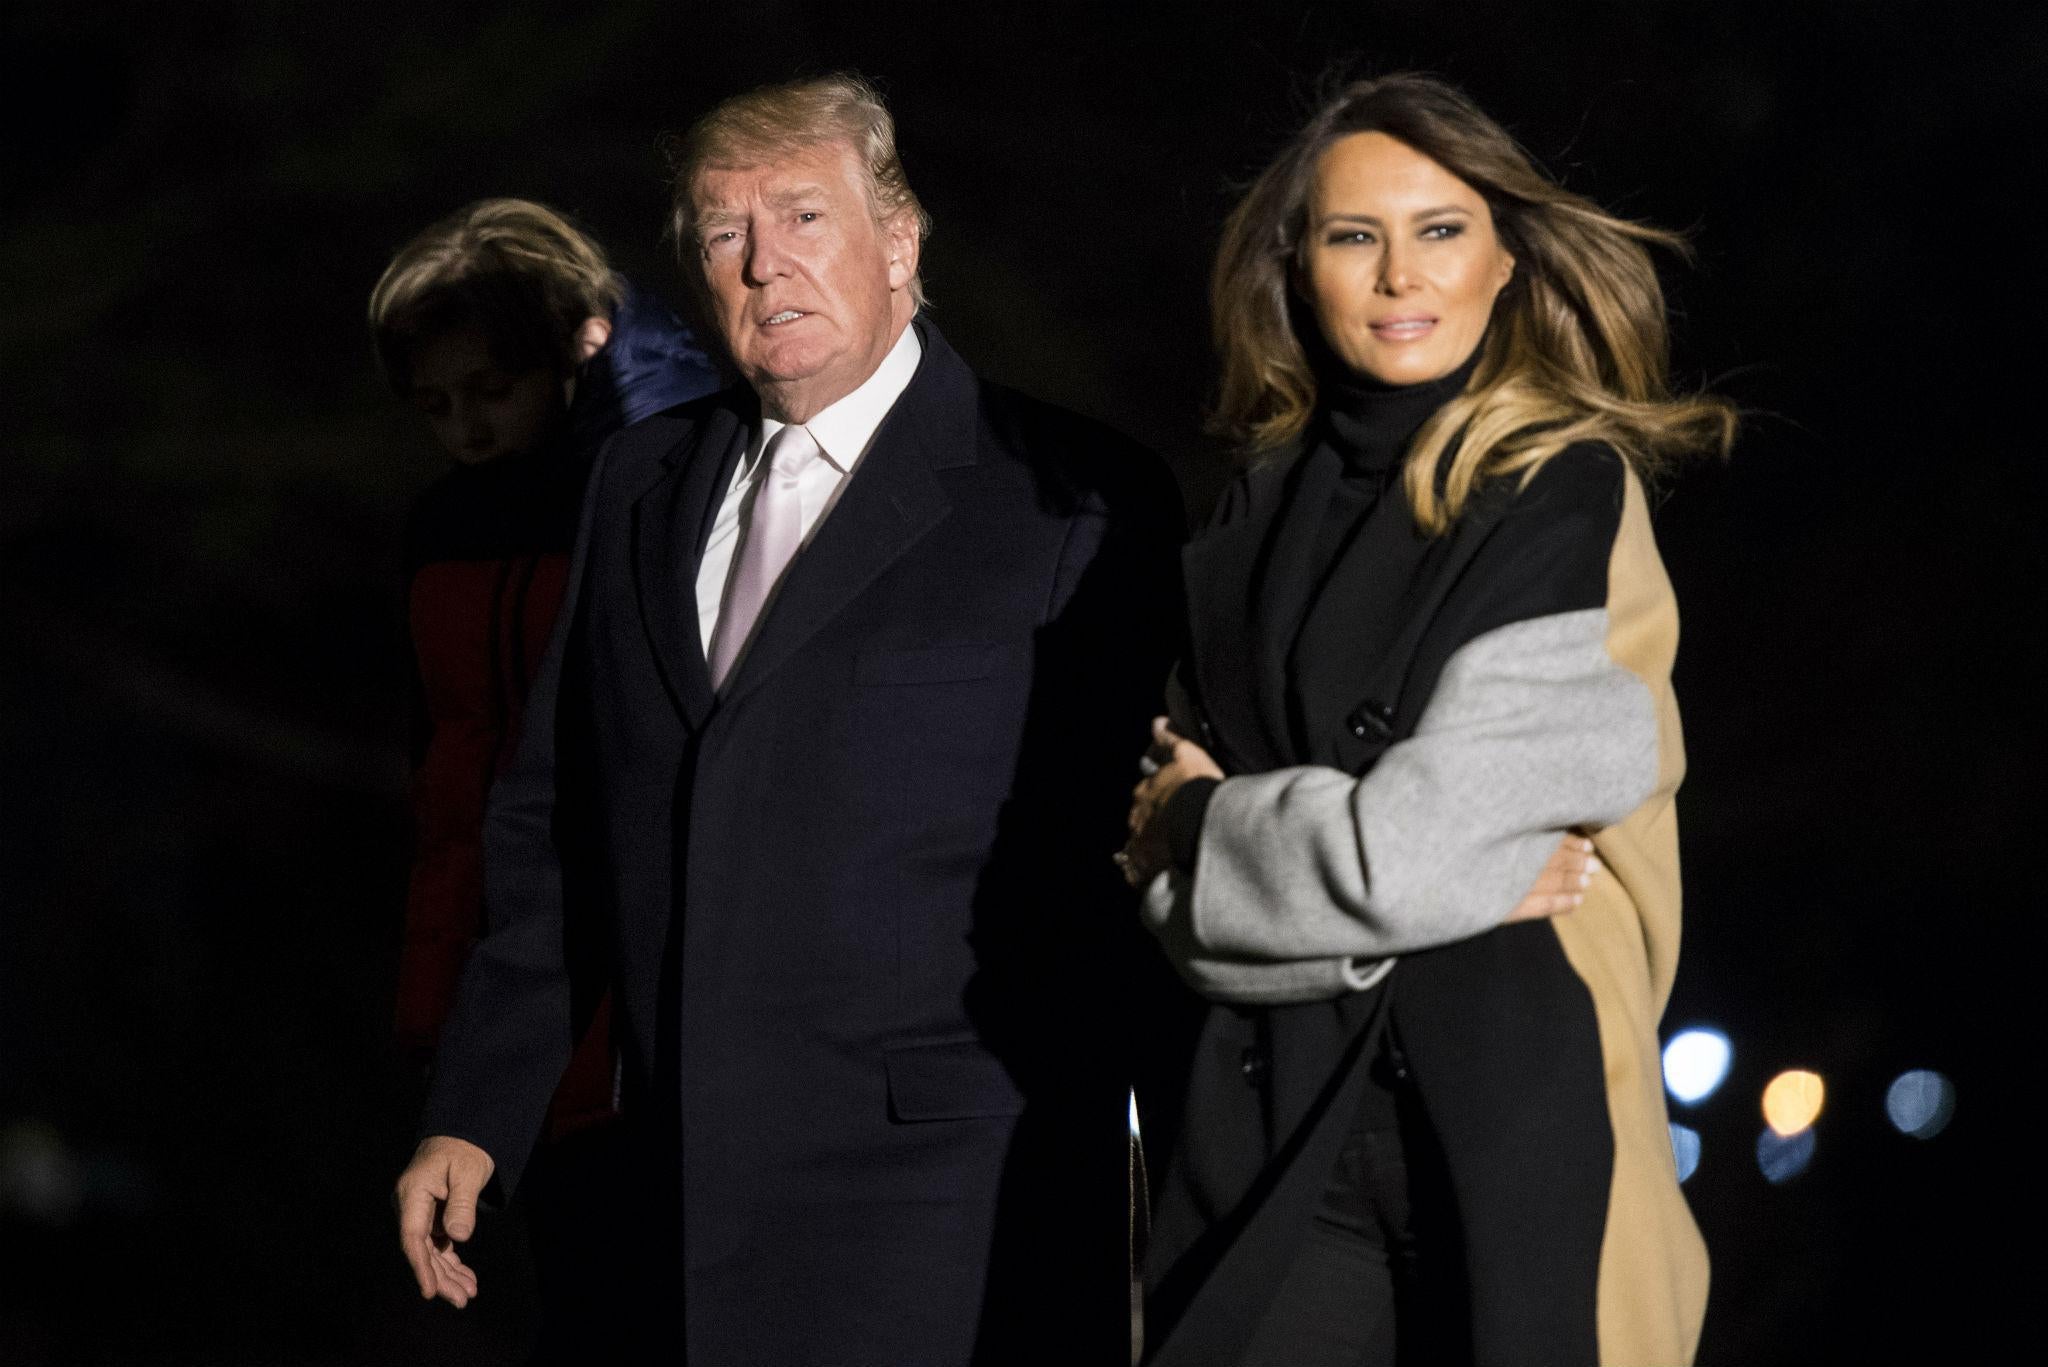 Melania Trump arrives at State of the Union address separately from ...